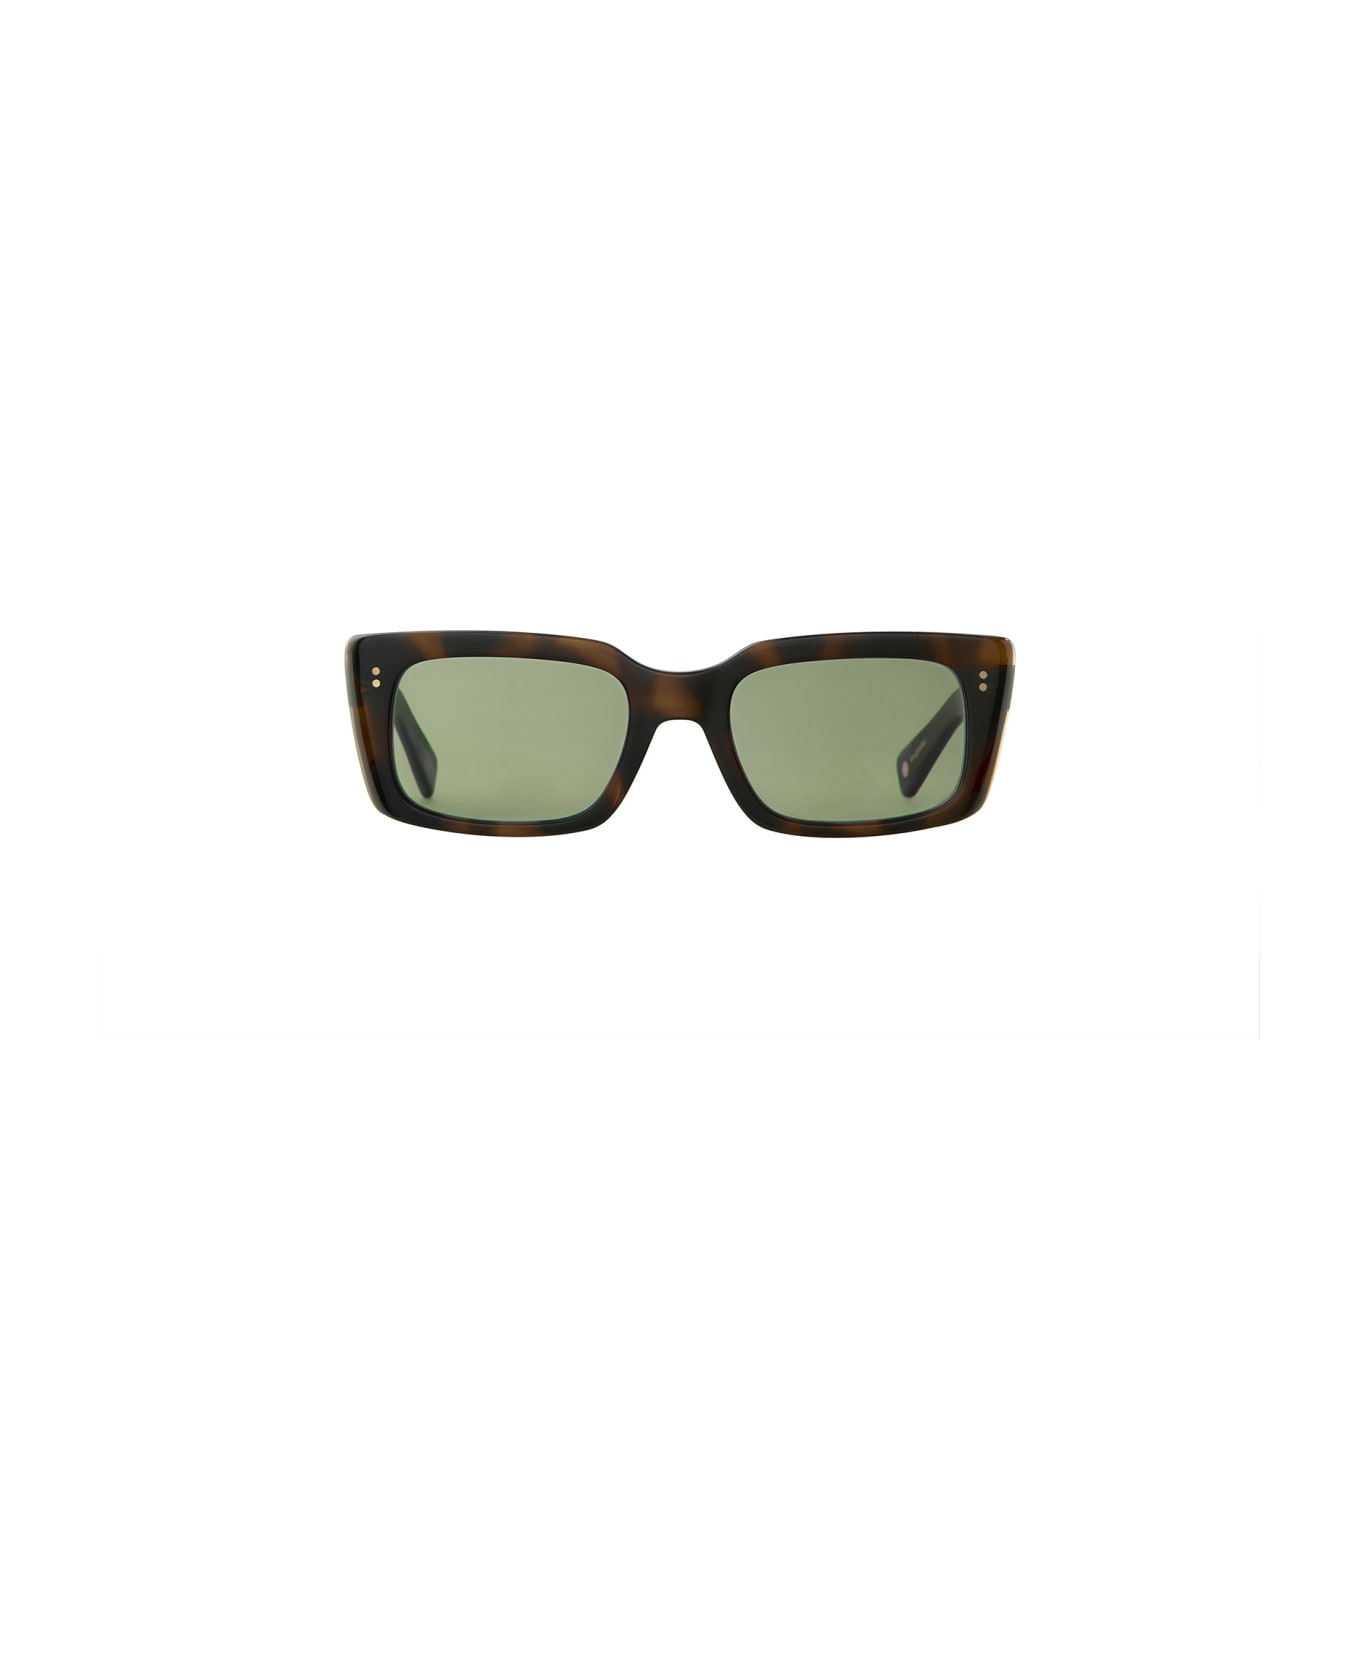 Garrett Leight Gl 3030 Sun Spotted Brown Shell Sunglasses - Spotted Brown Shell